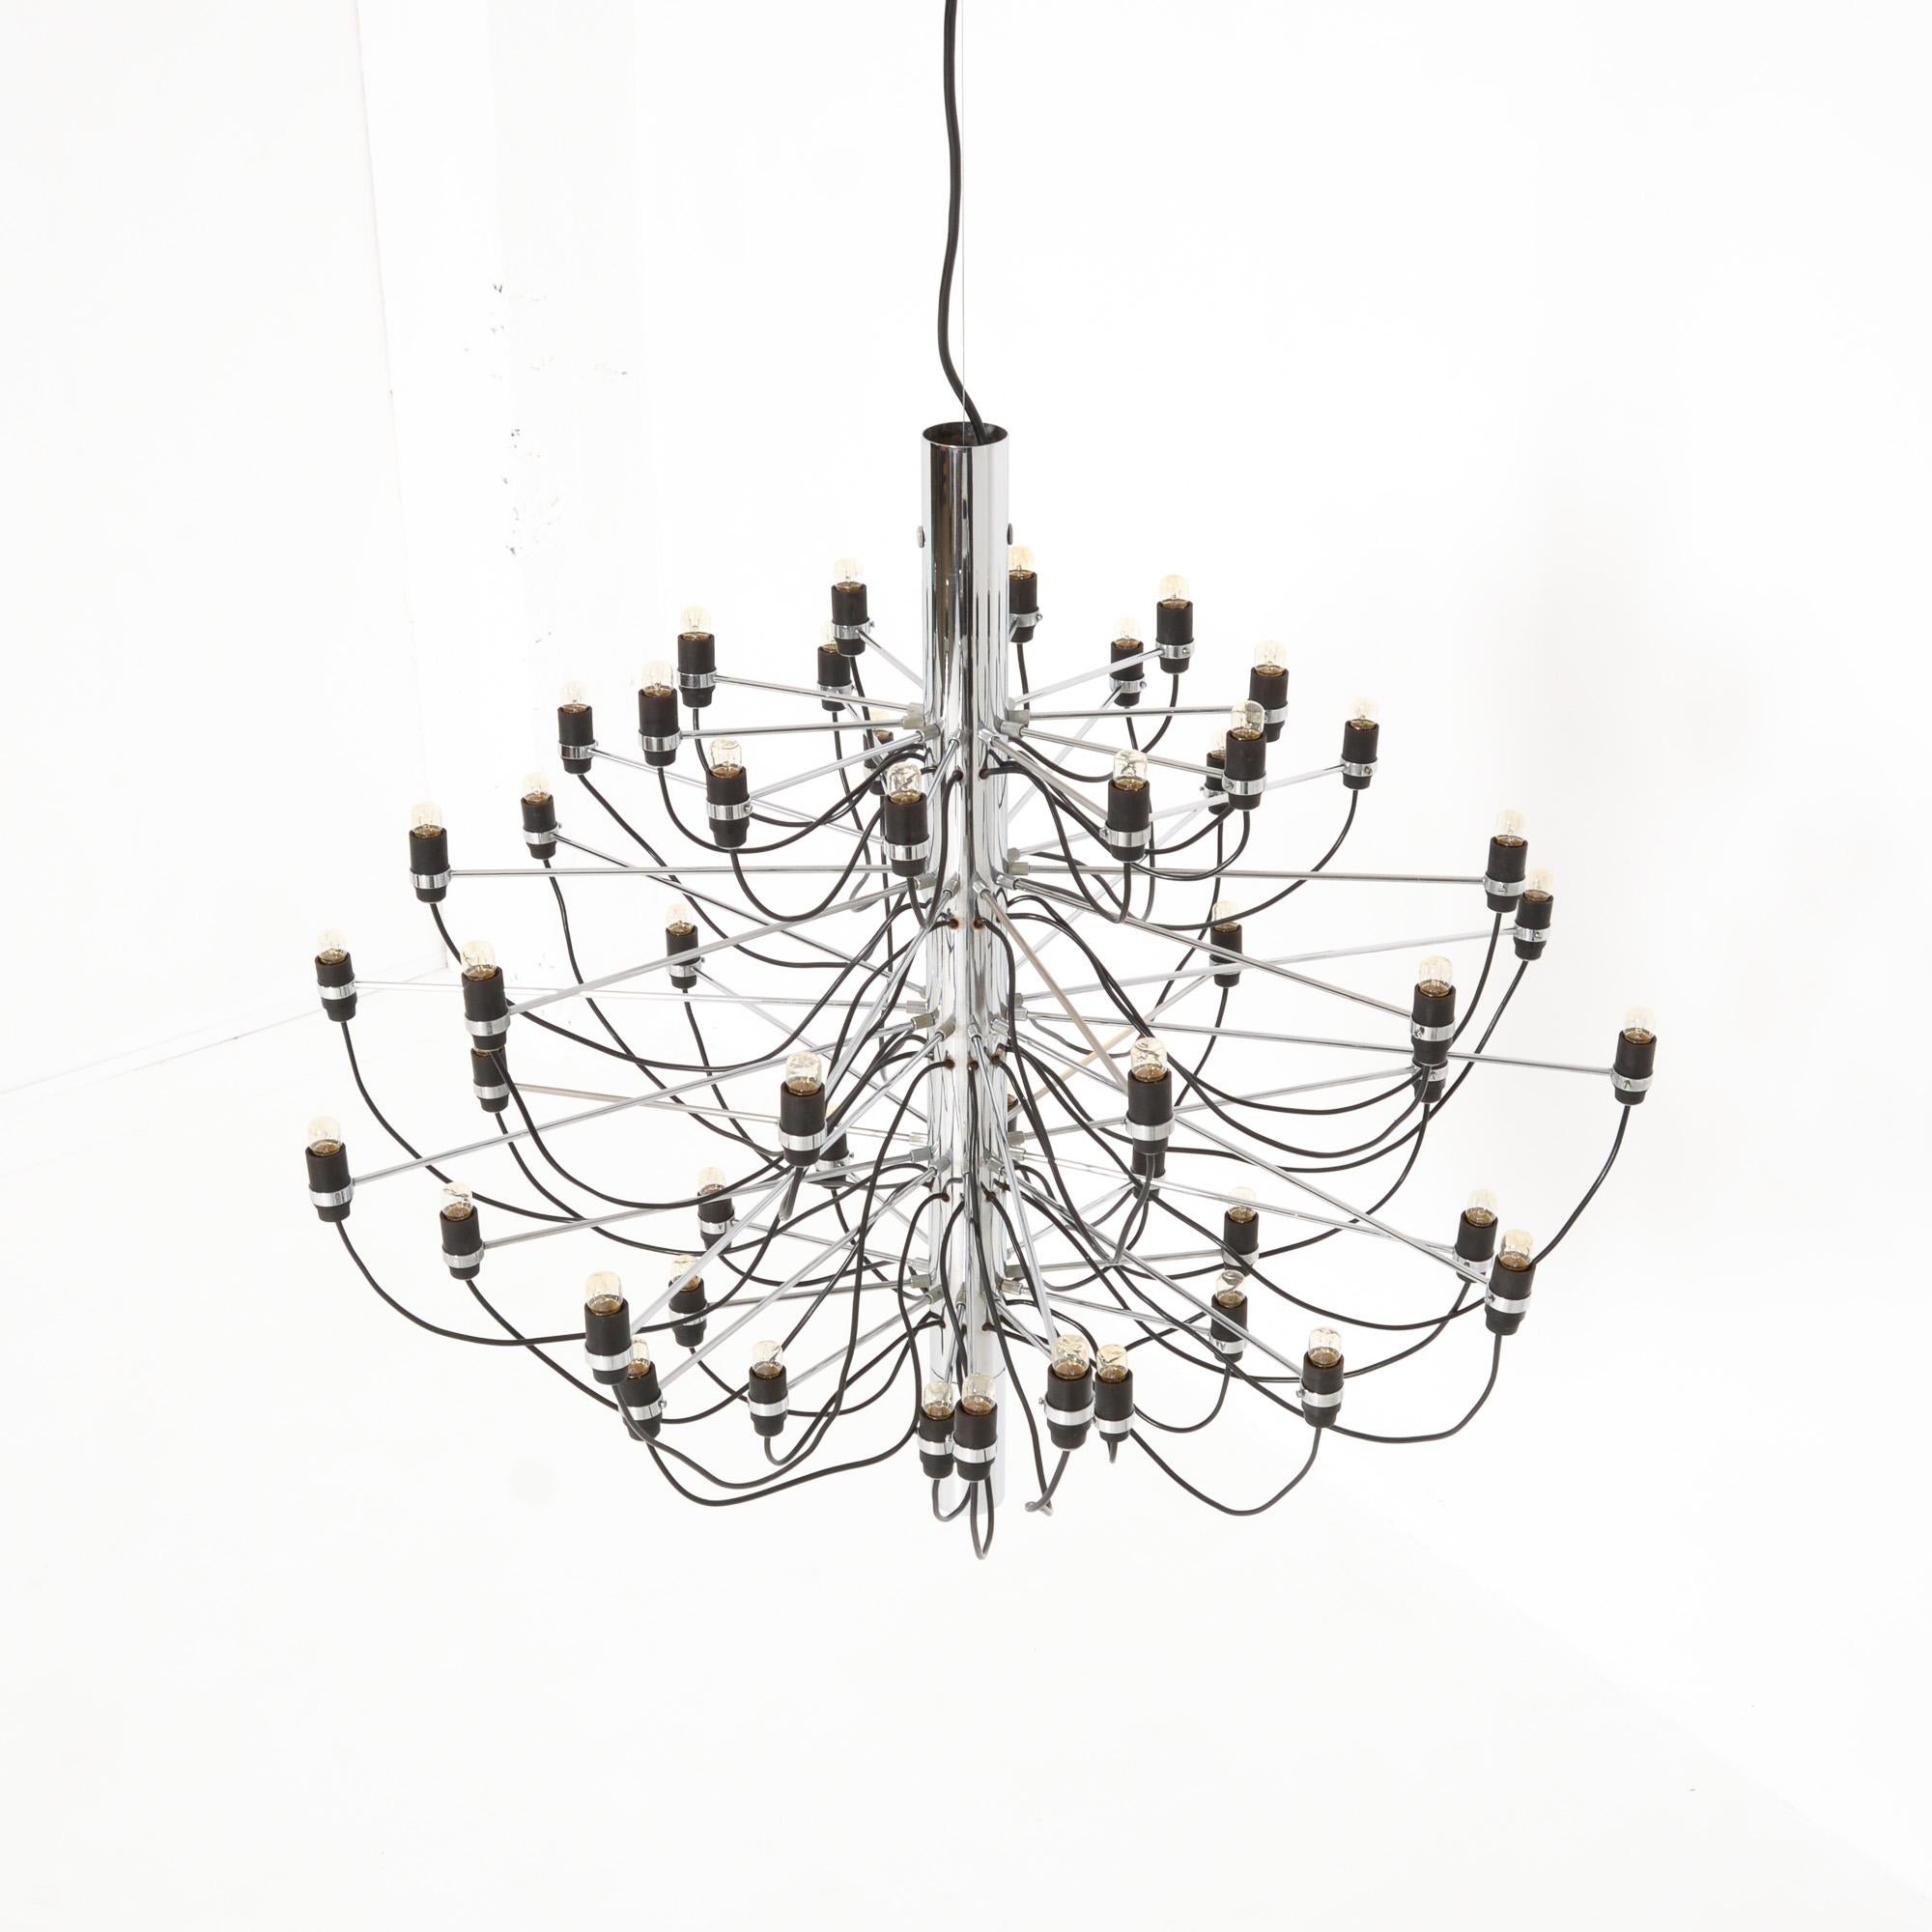 This iconic chandelier model 2097/50 is designed by Gino Sarfatti in 1958 and produced by Arteluce, Italy.
For this chandelier, Sarfatti was inspired by the archetype of the ancient chandelier.
The many chrome-plated steel arms are screwed